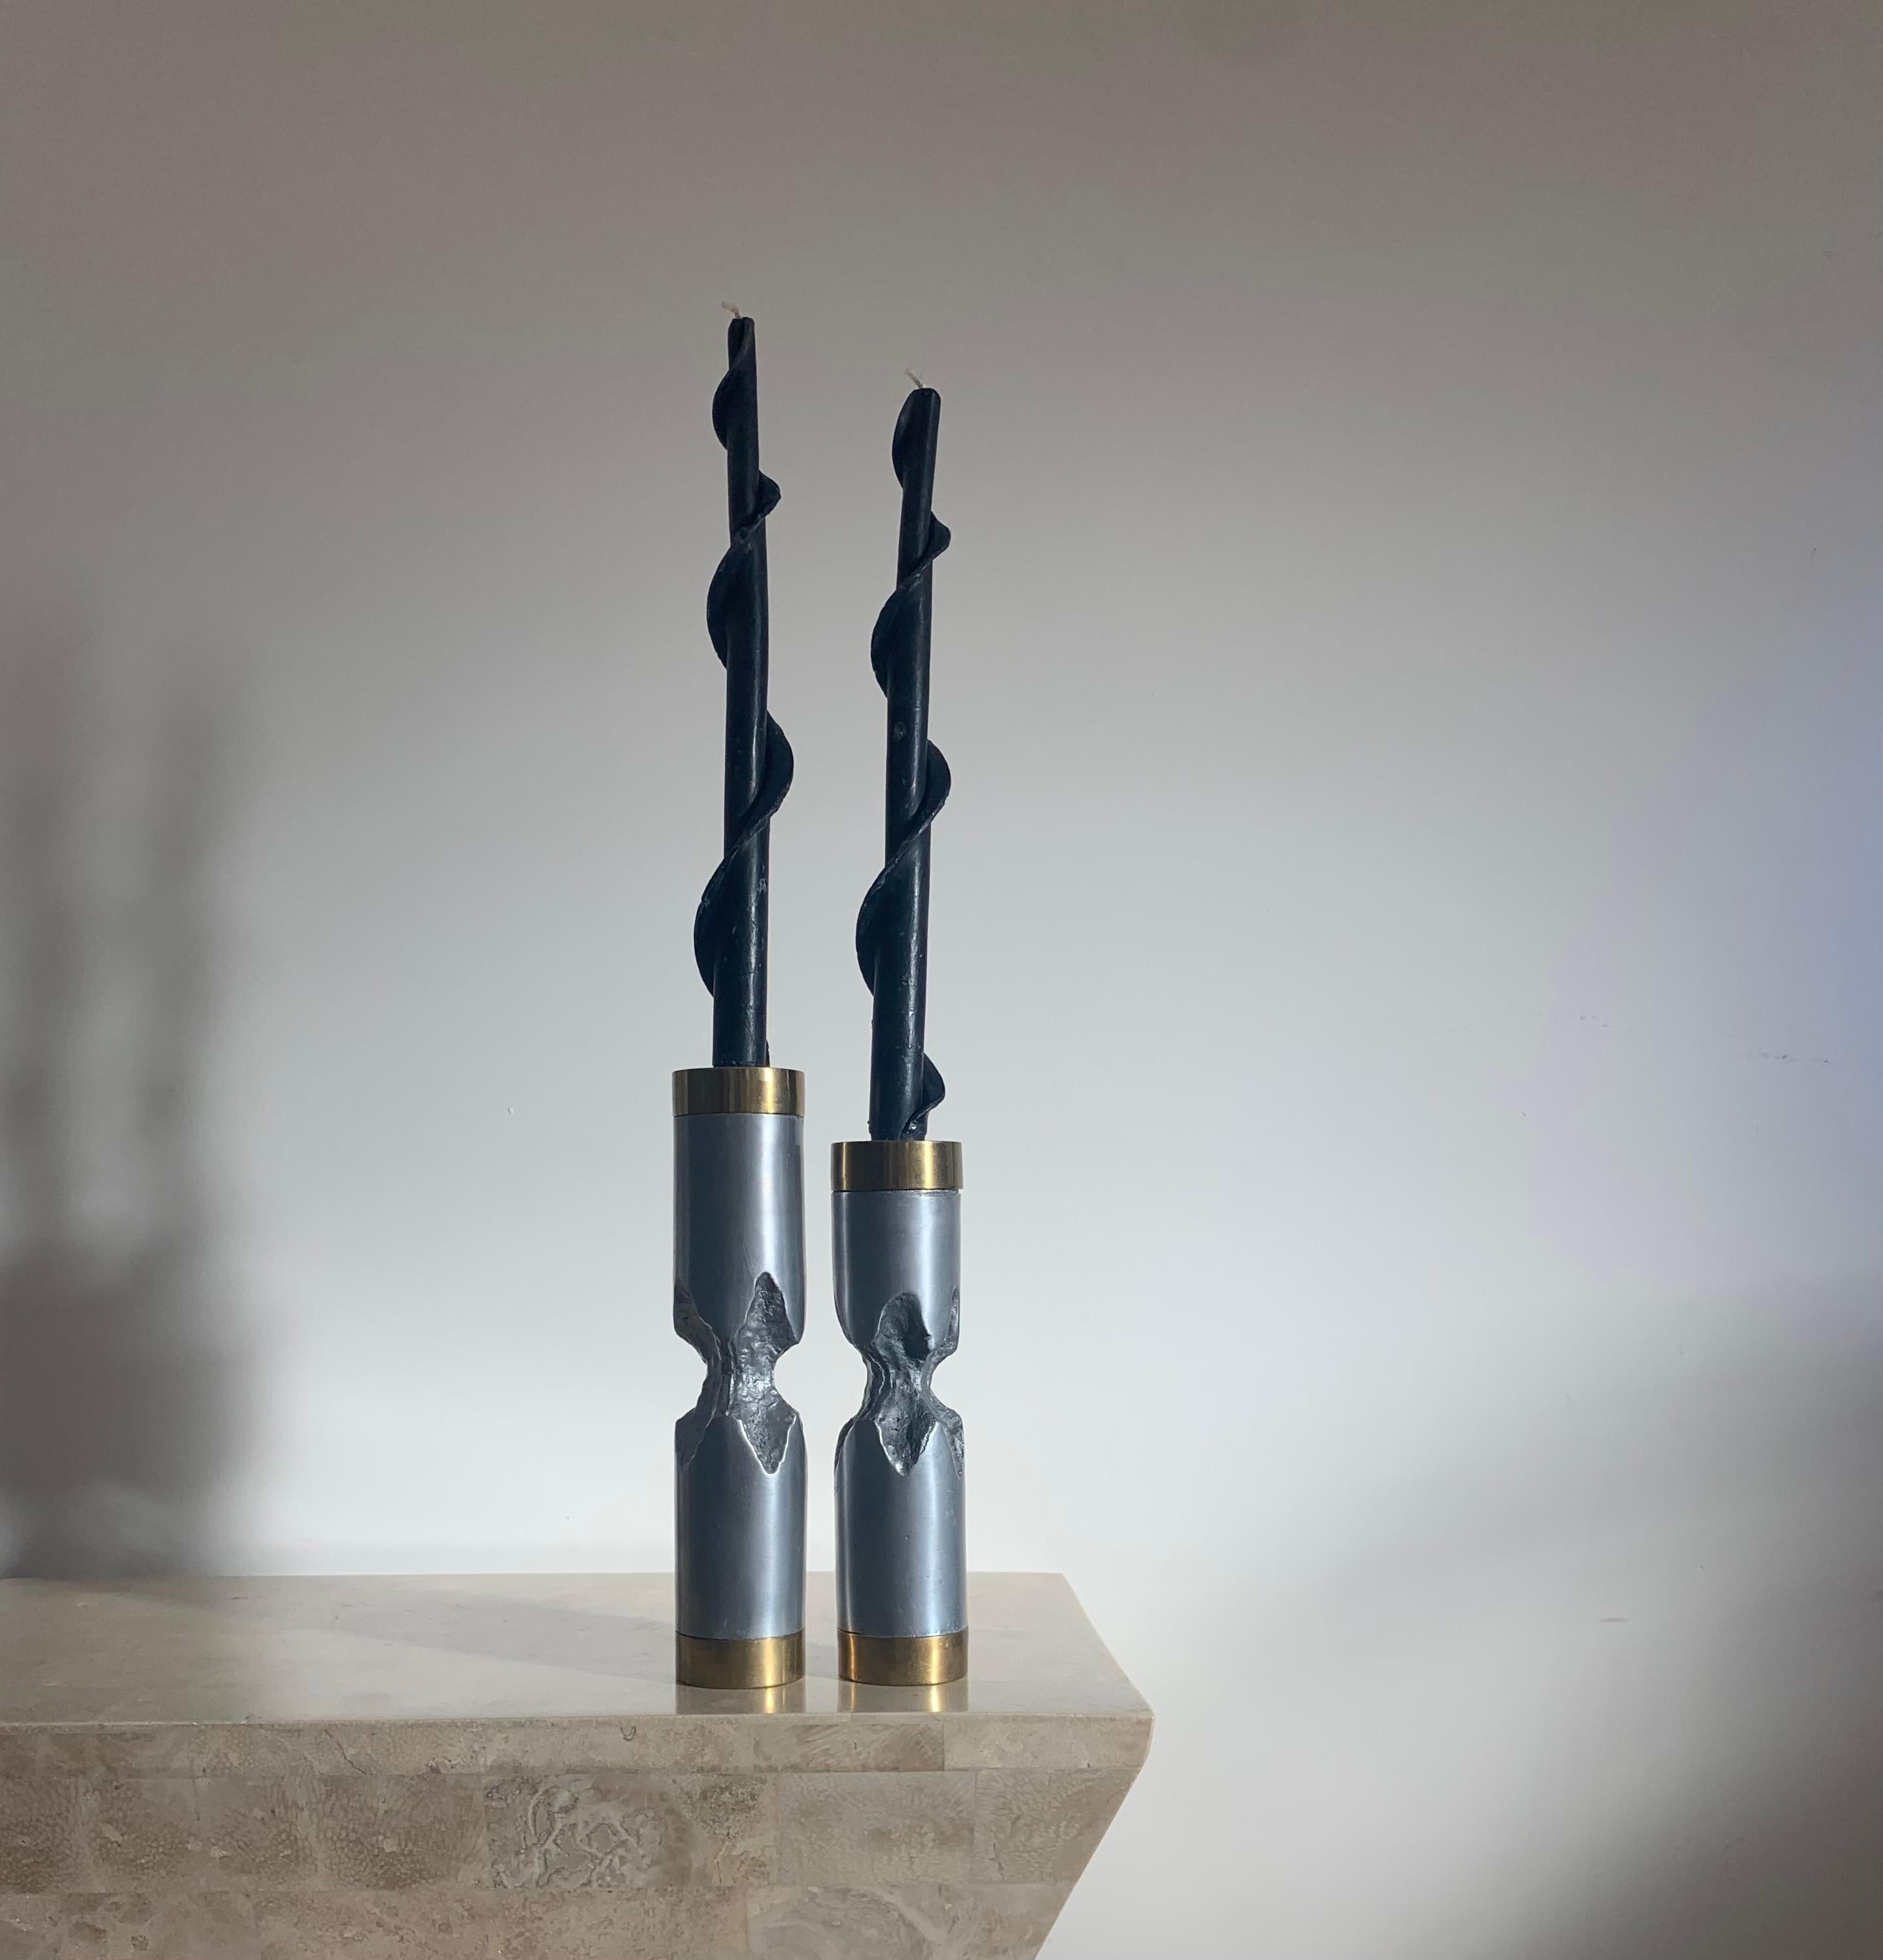 Pair of David Marshall Brutalist Metal Candlesticks, 1970s For Sale 2